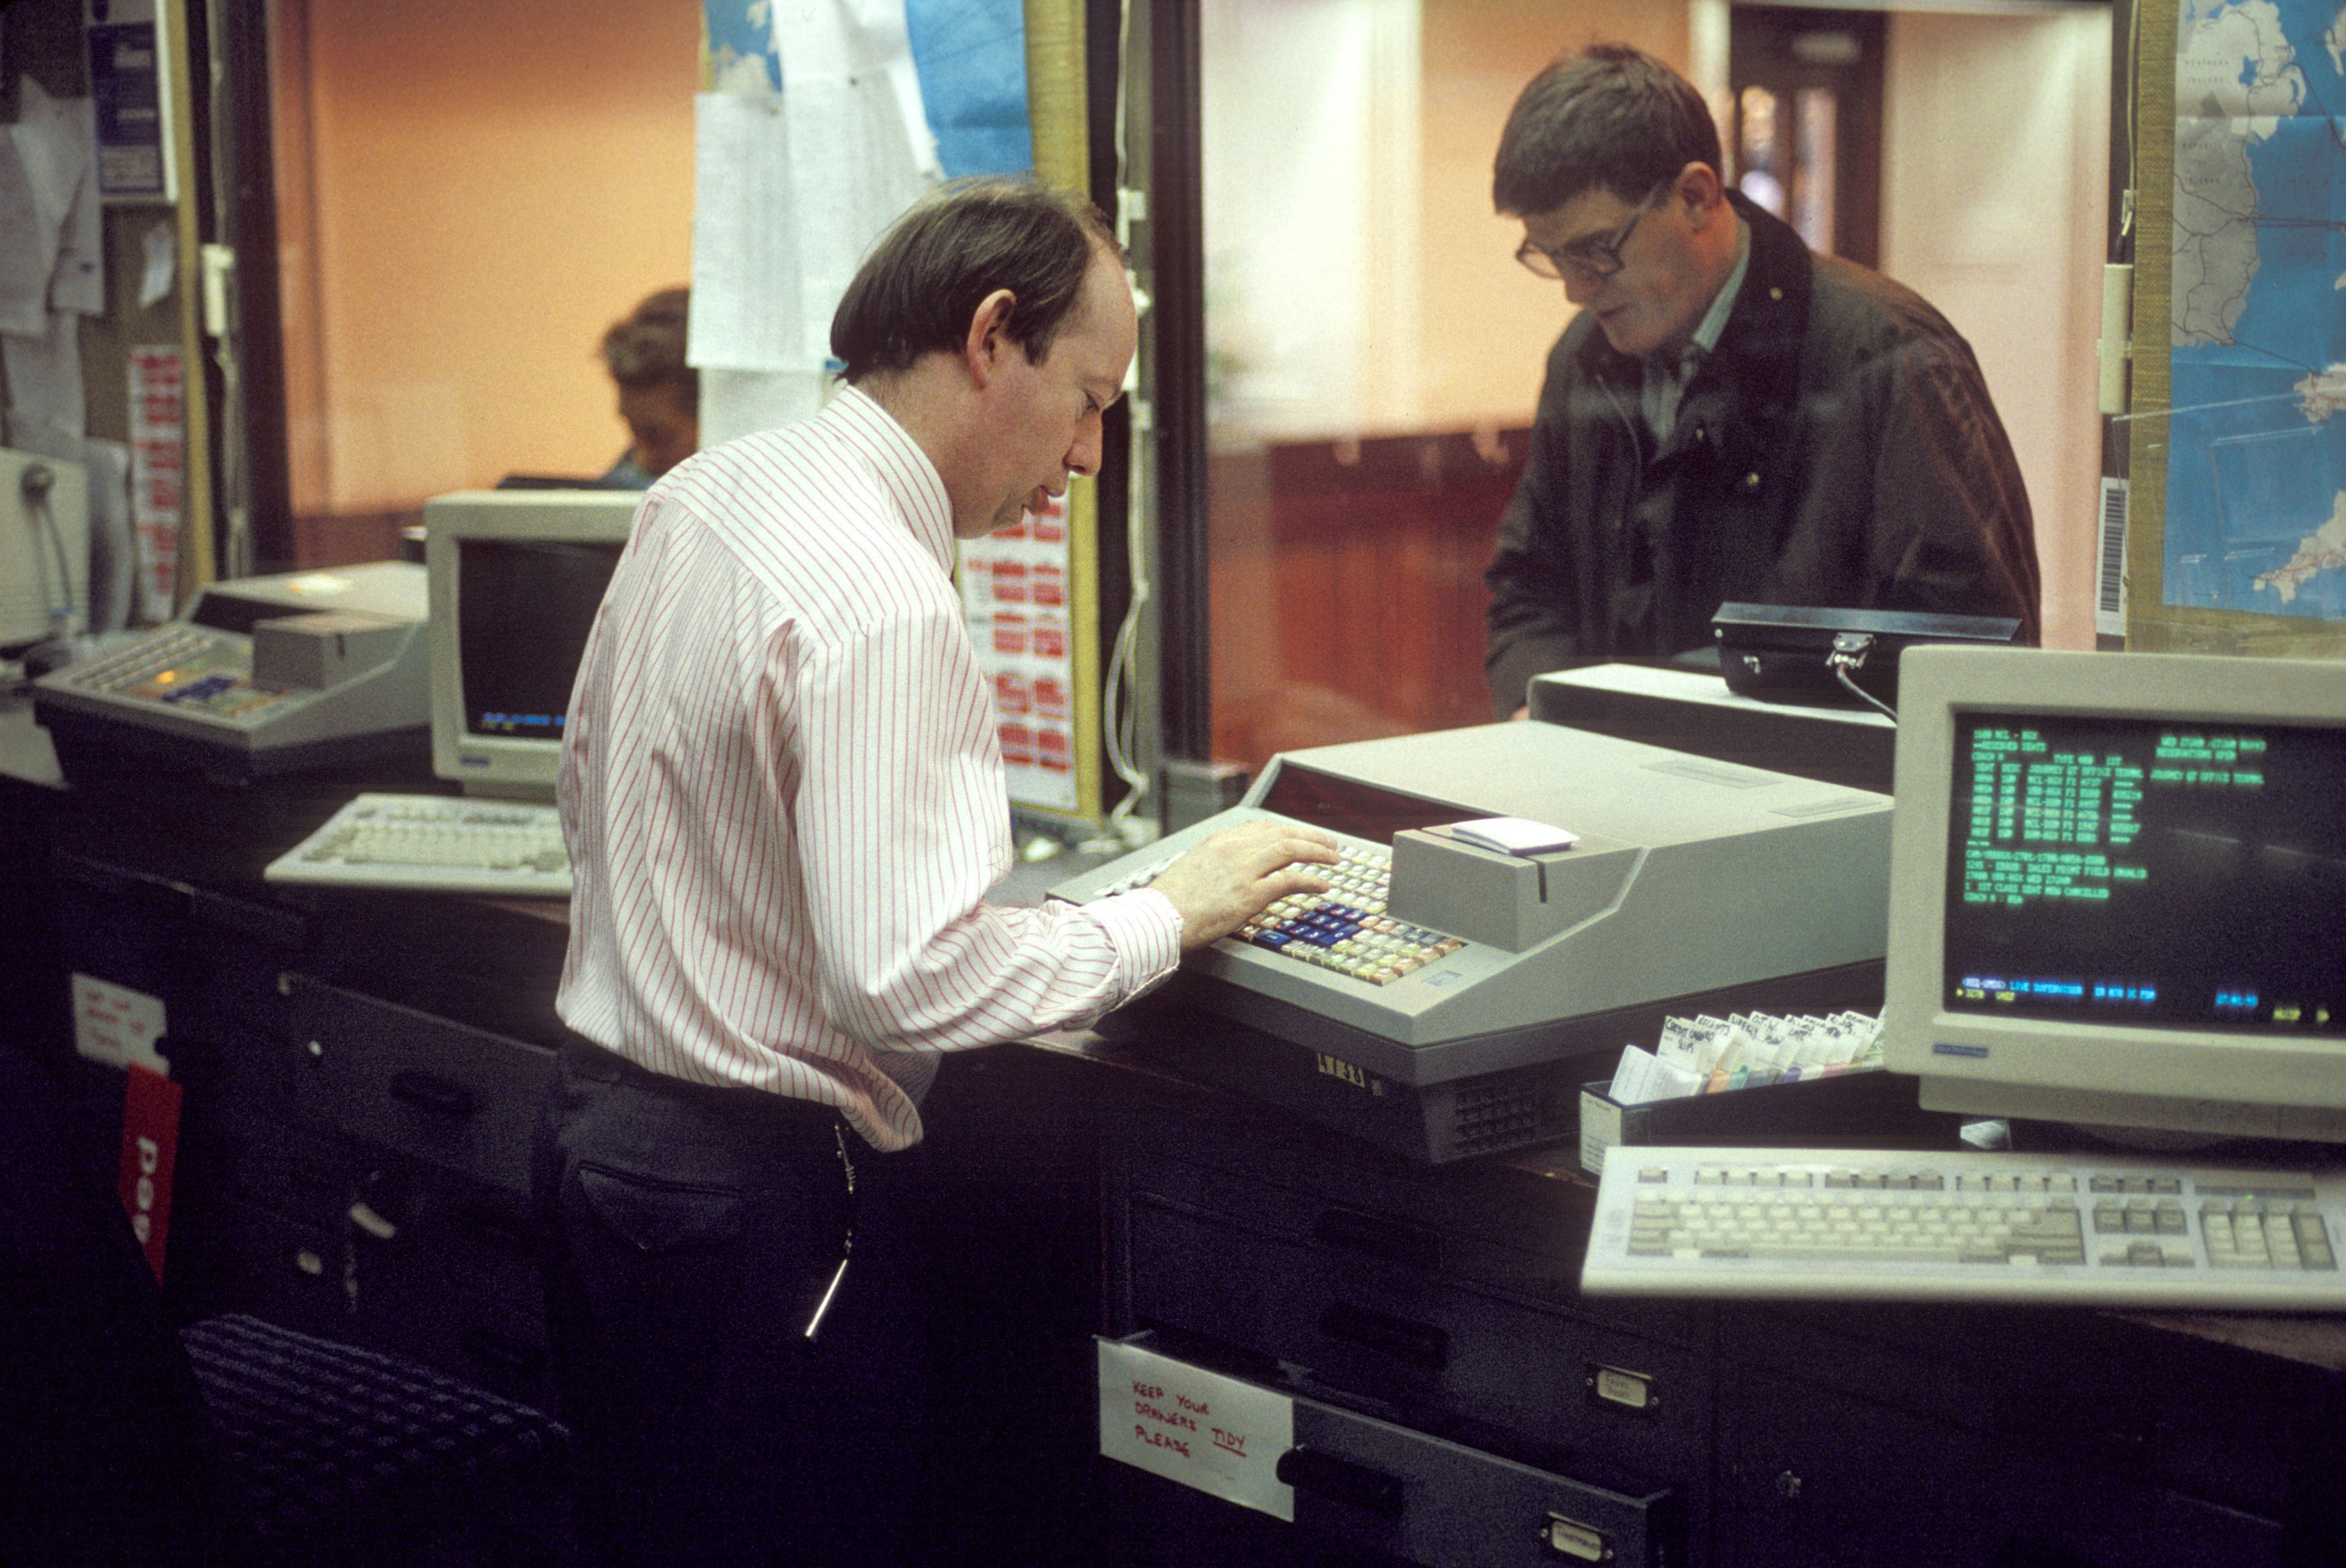 The ticket office at York station, 1993.